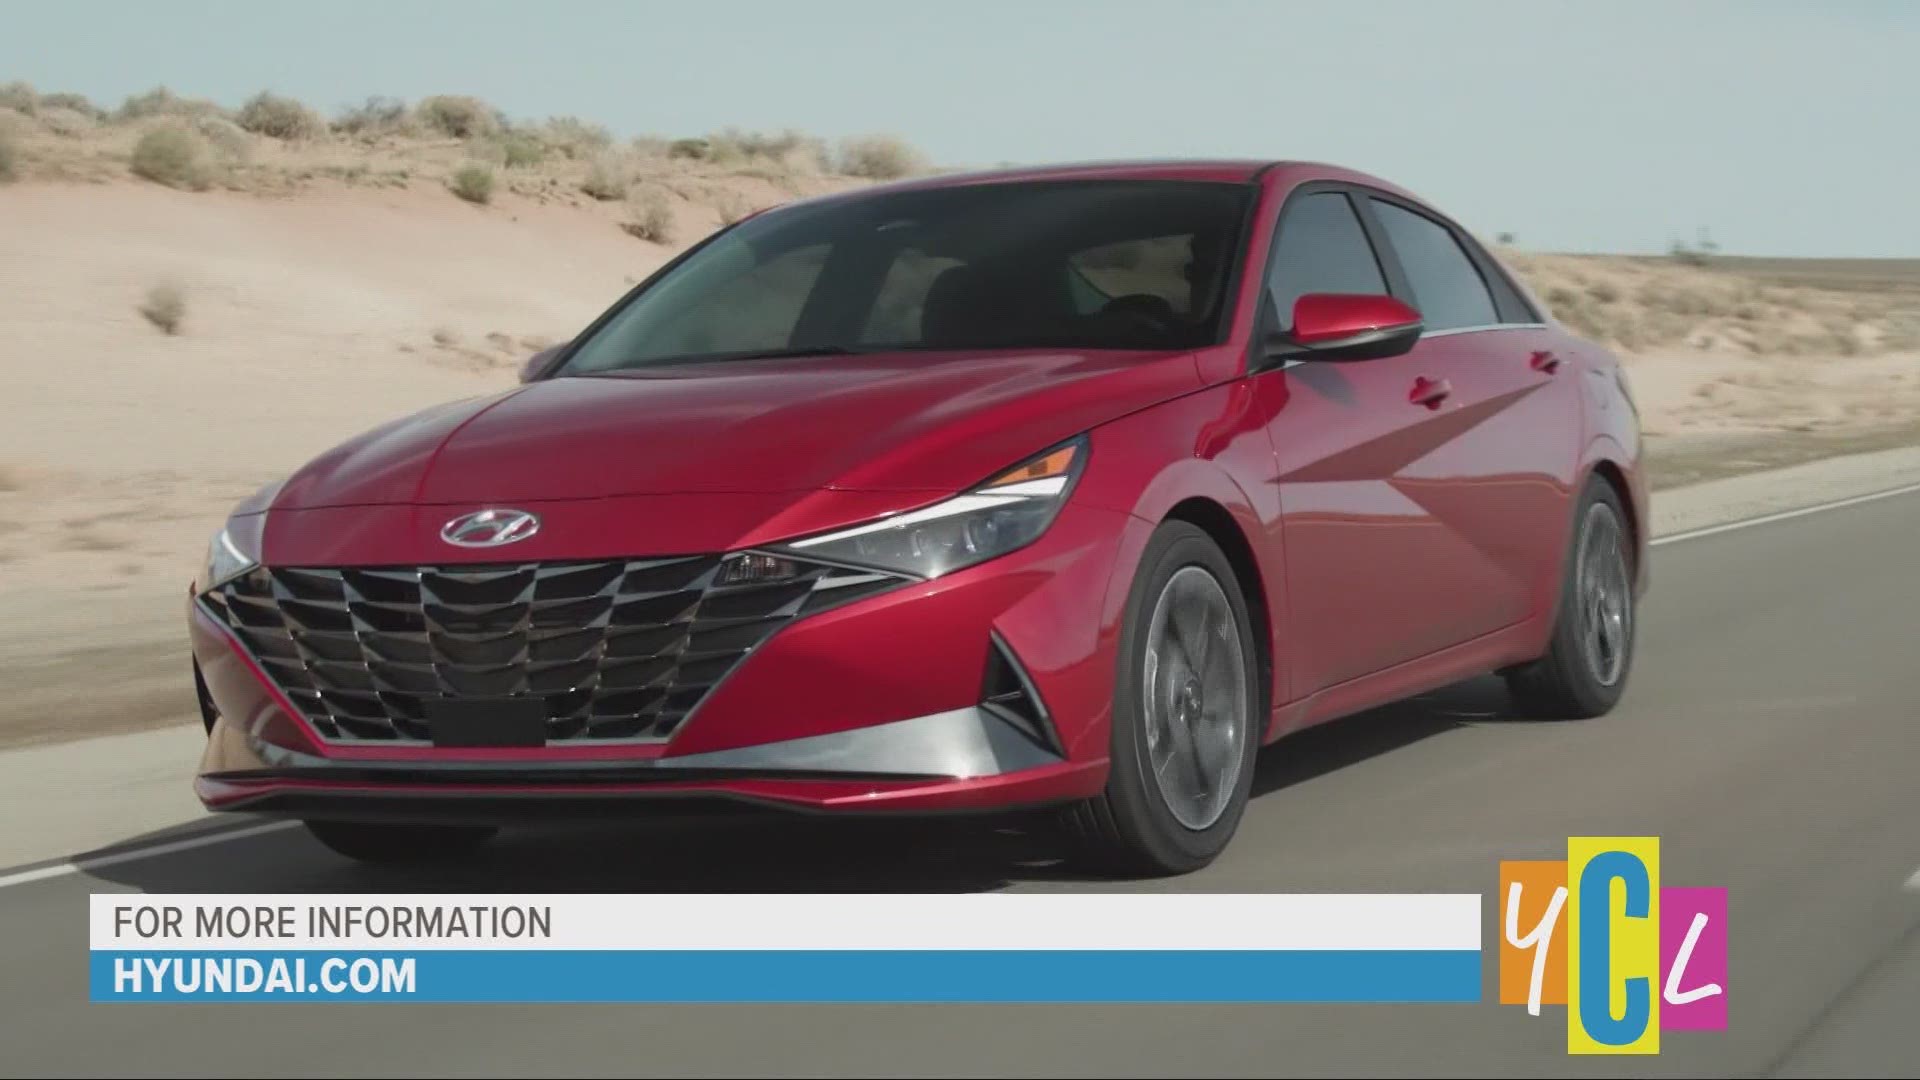 Find out why the Hyundai Elantra won the prestigious award for 2021 North American Car of the Year. This segment was paid for by Hyundai.